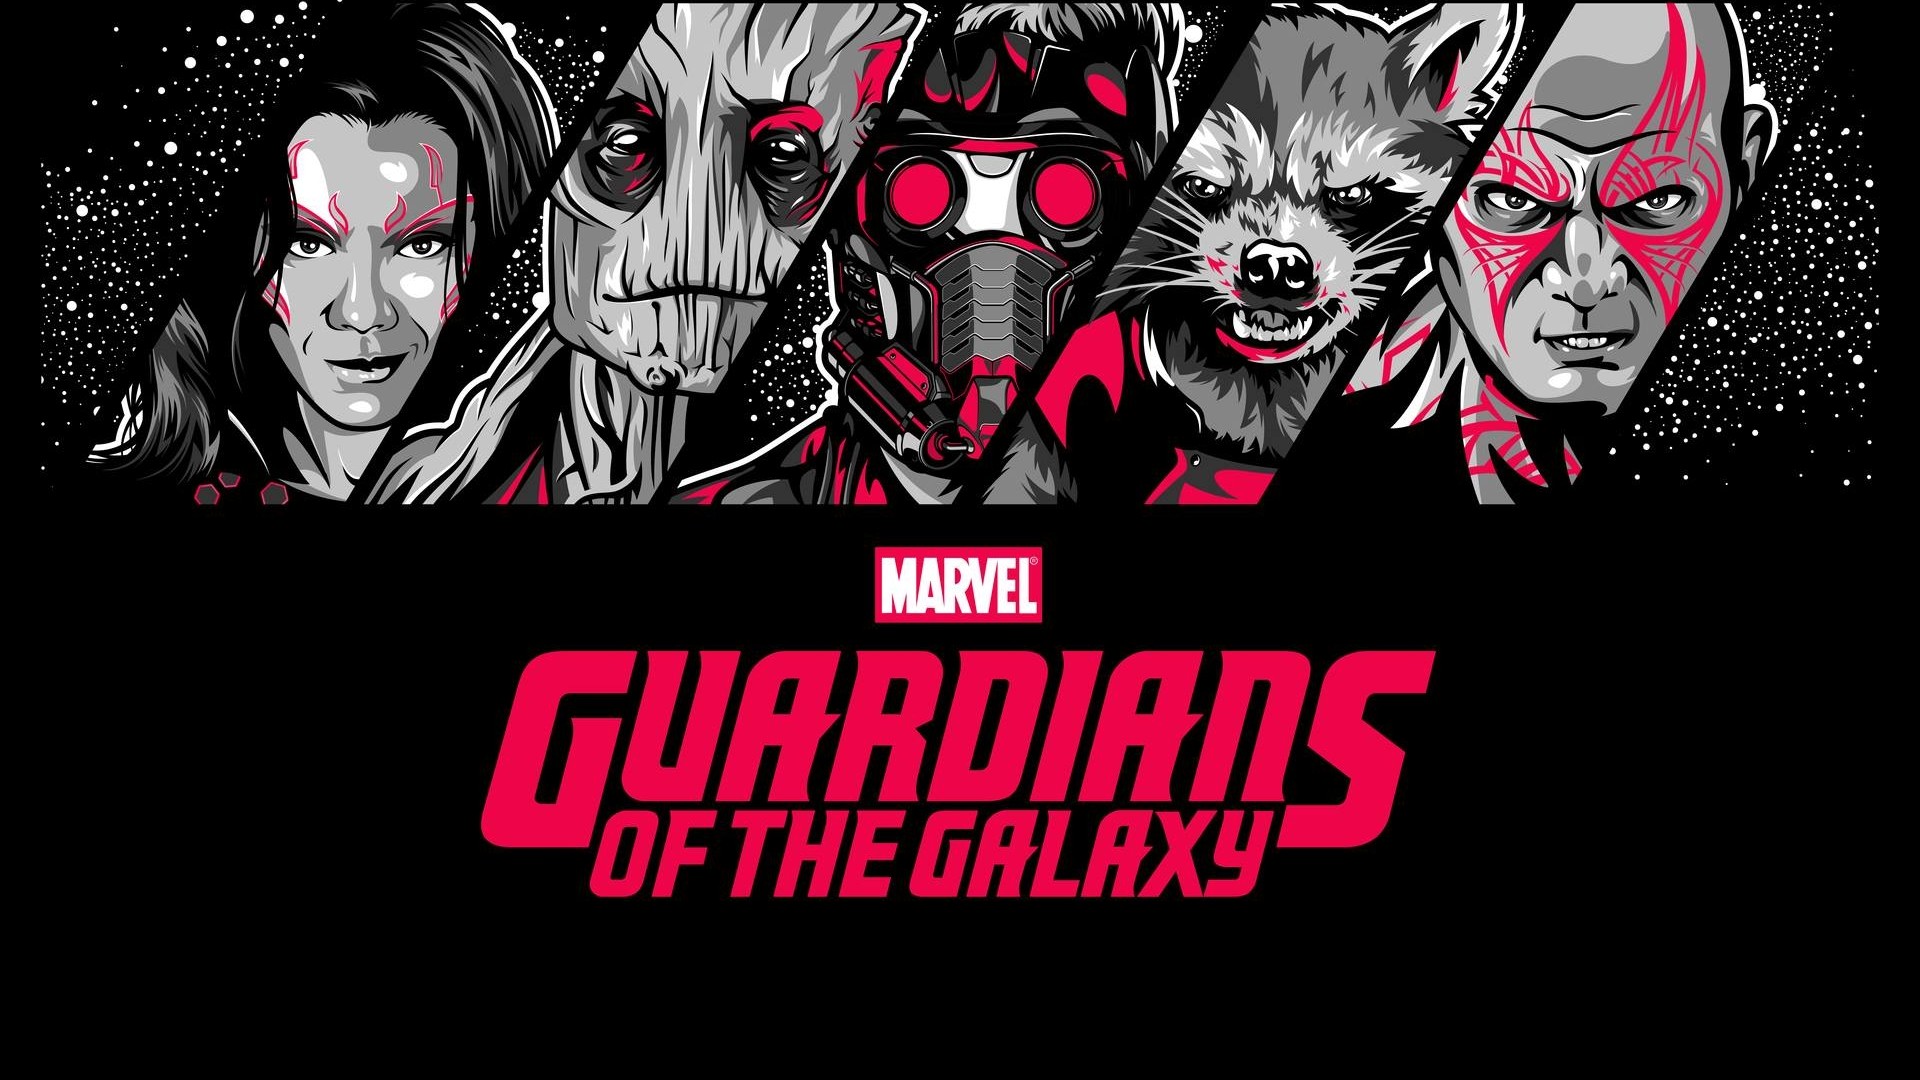 General 1920x1080 Guardians of the Galaxy Star-Lord Gamora  Rocket Raccoon Groot Drax the Destroyer movies Marvel Cinematic Universe science fiction collage superhero Marvel Comics